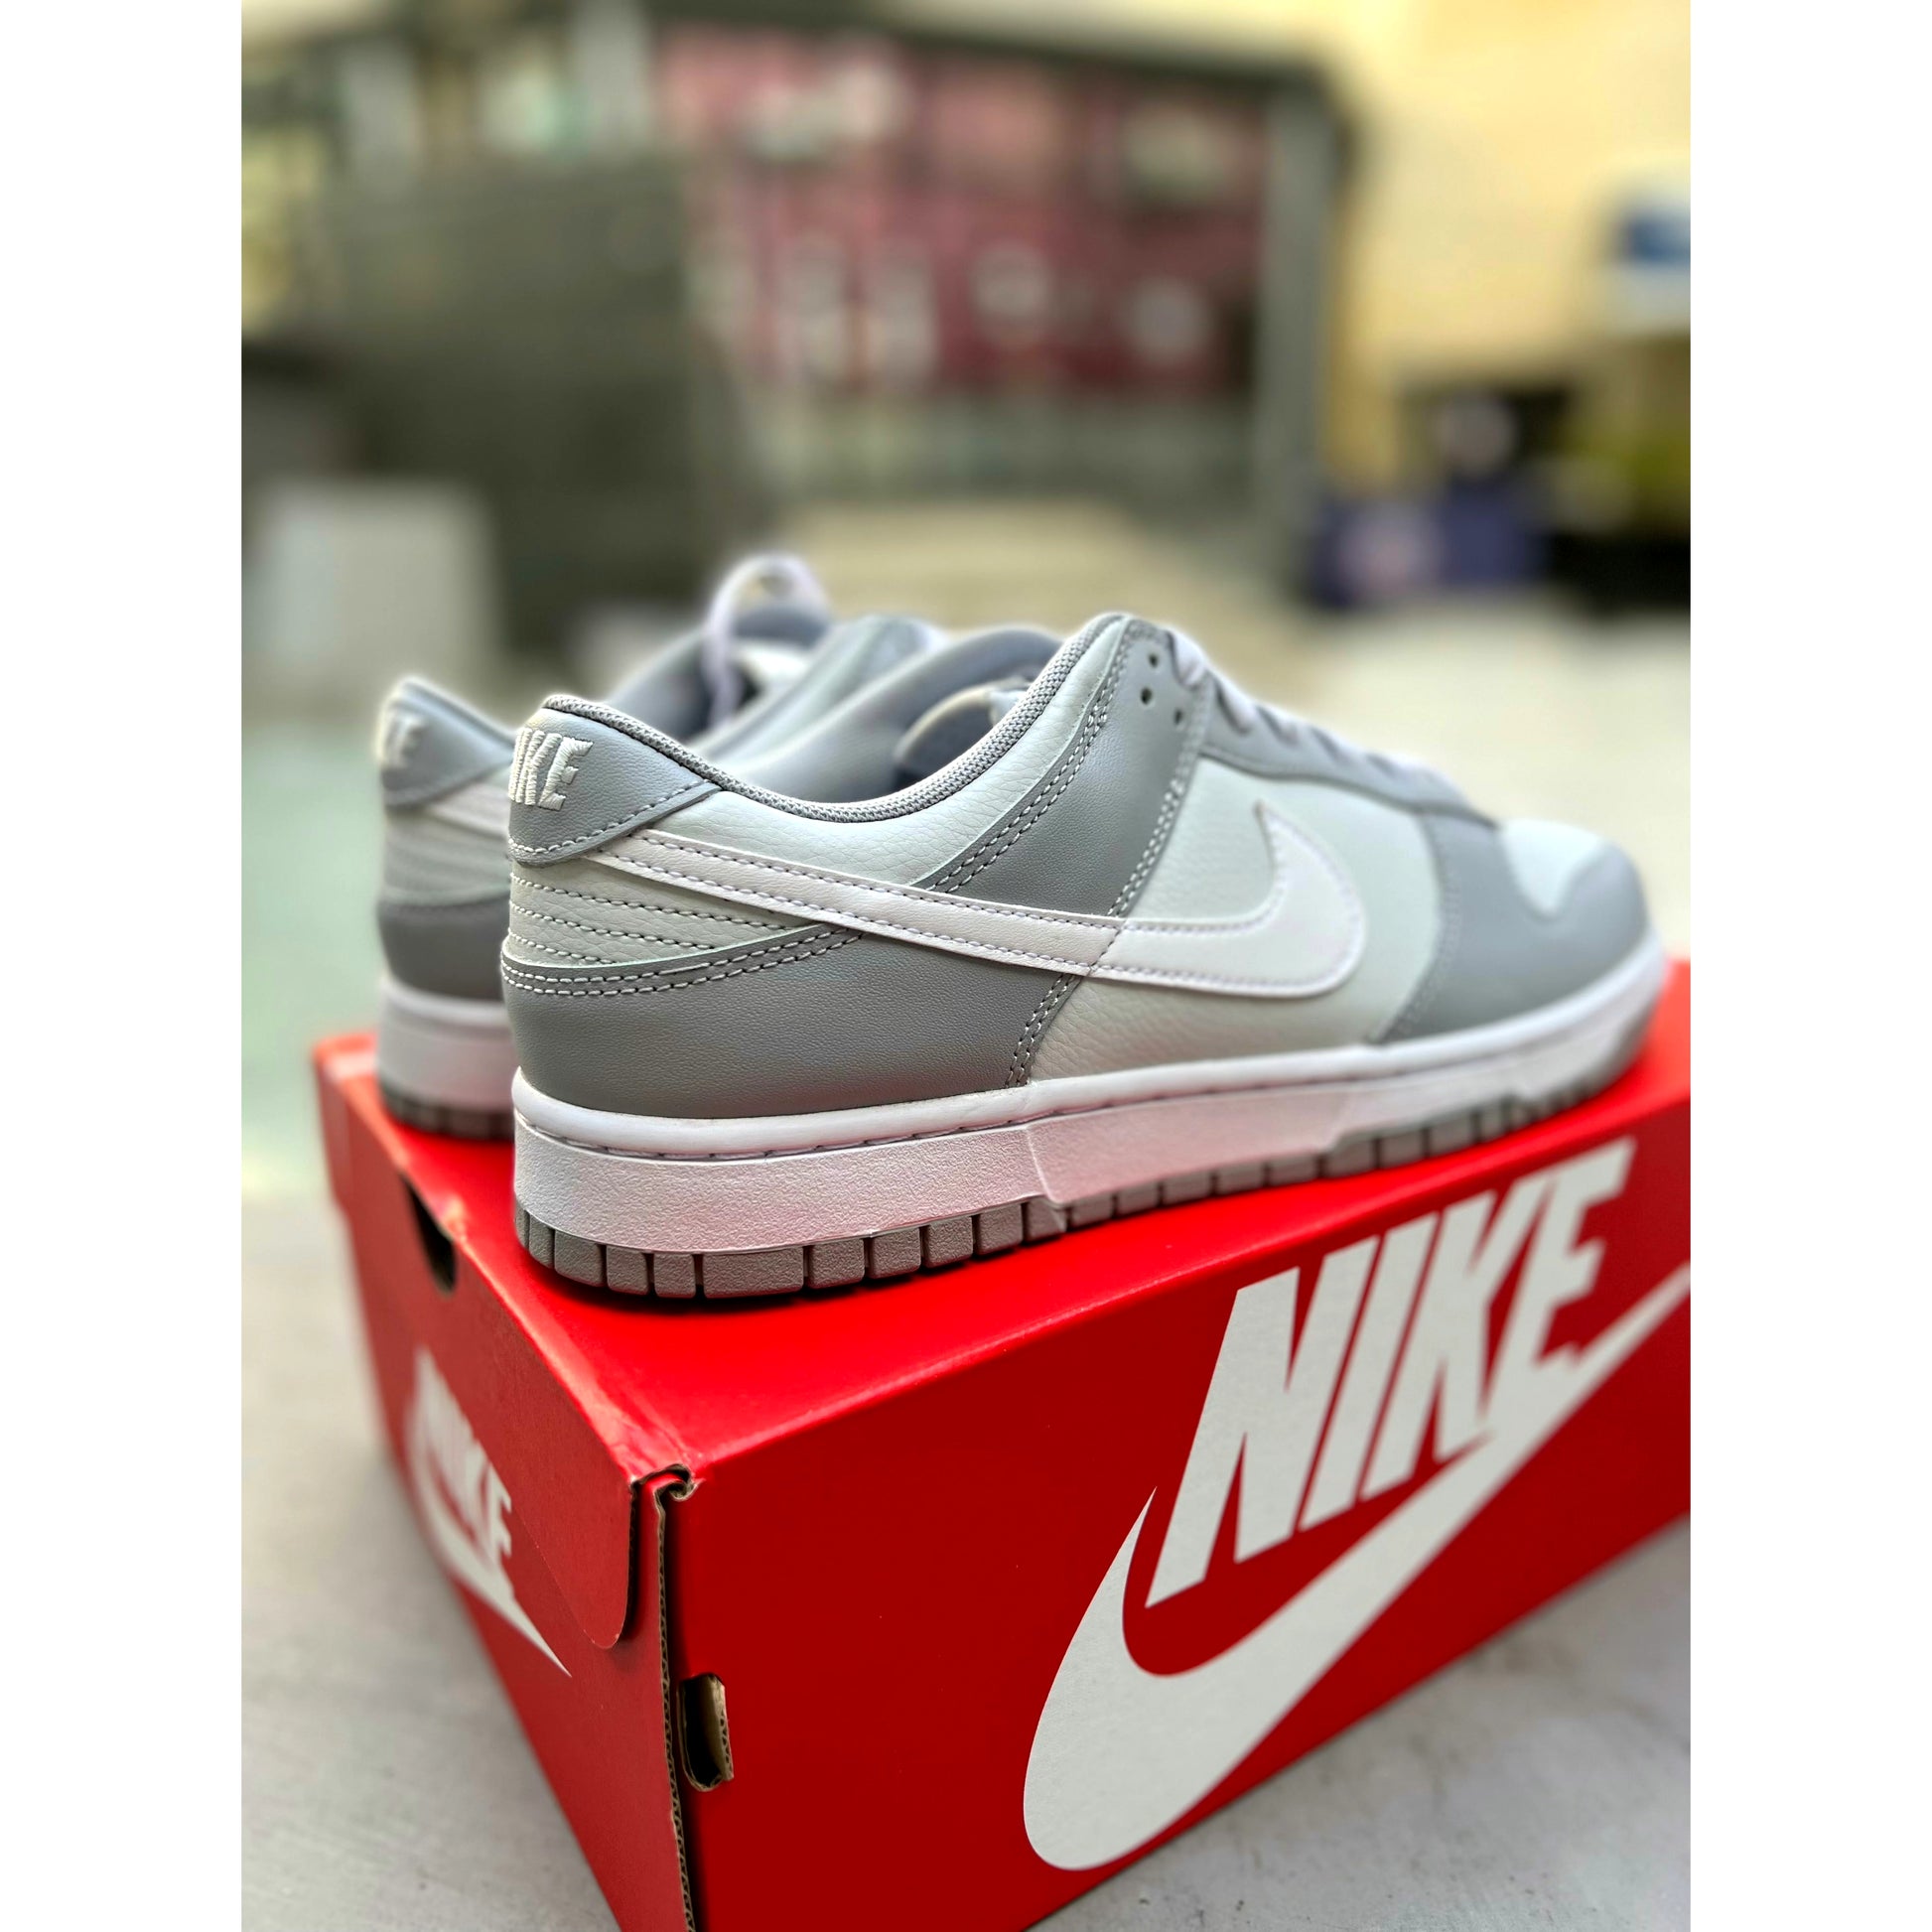 Nike Dunk Low Two Tone Grey from Nike